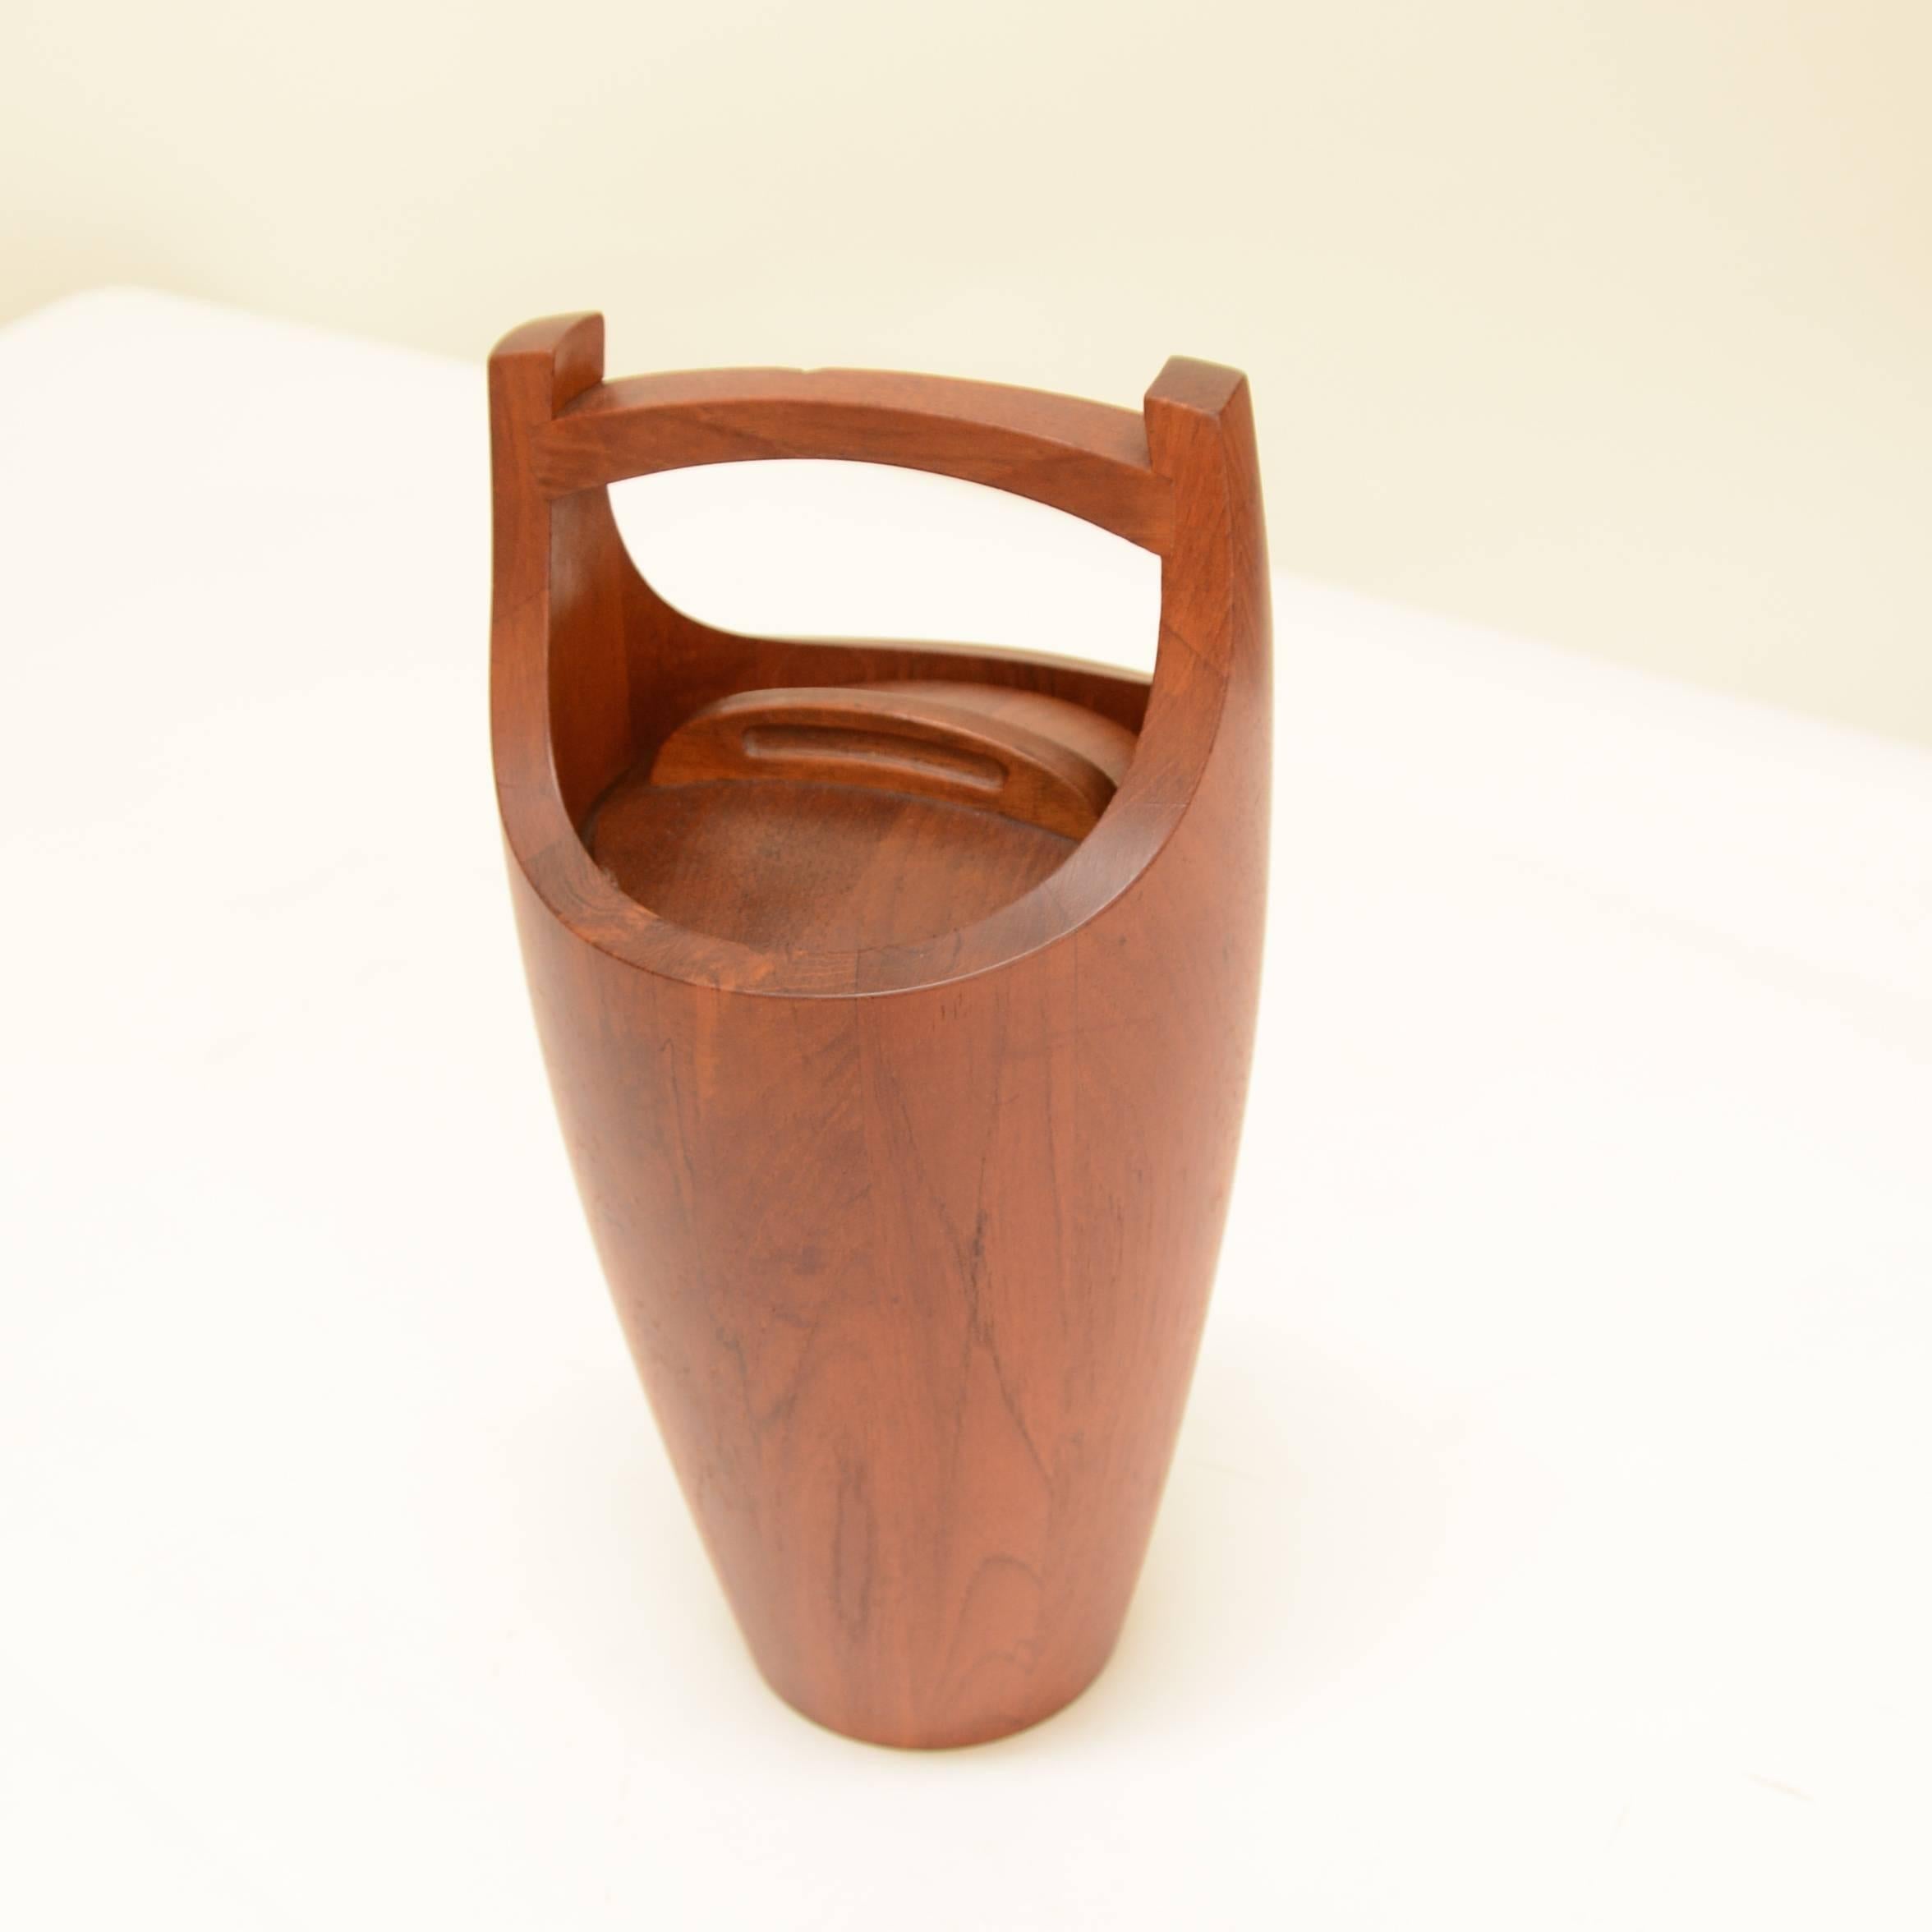 Stunning vintage Danish modern teak "Congo" ice bucket designed by Jens Quistgaard for Dansk. Lined with orange plastic, it's ready for use. 
 
Great condition for its age, with minimal normal wear. There is no separation of the wood and